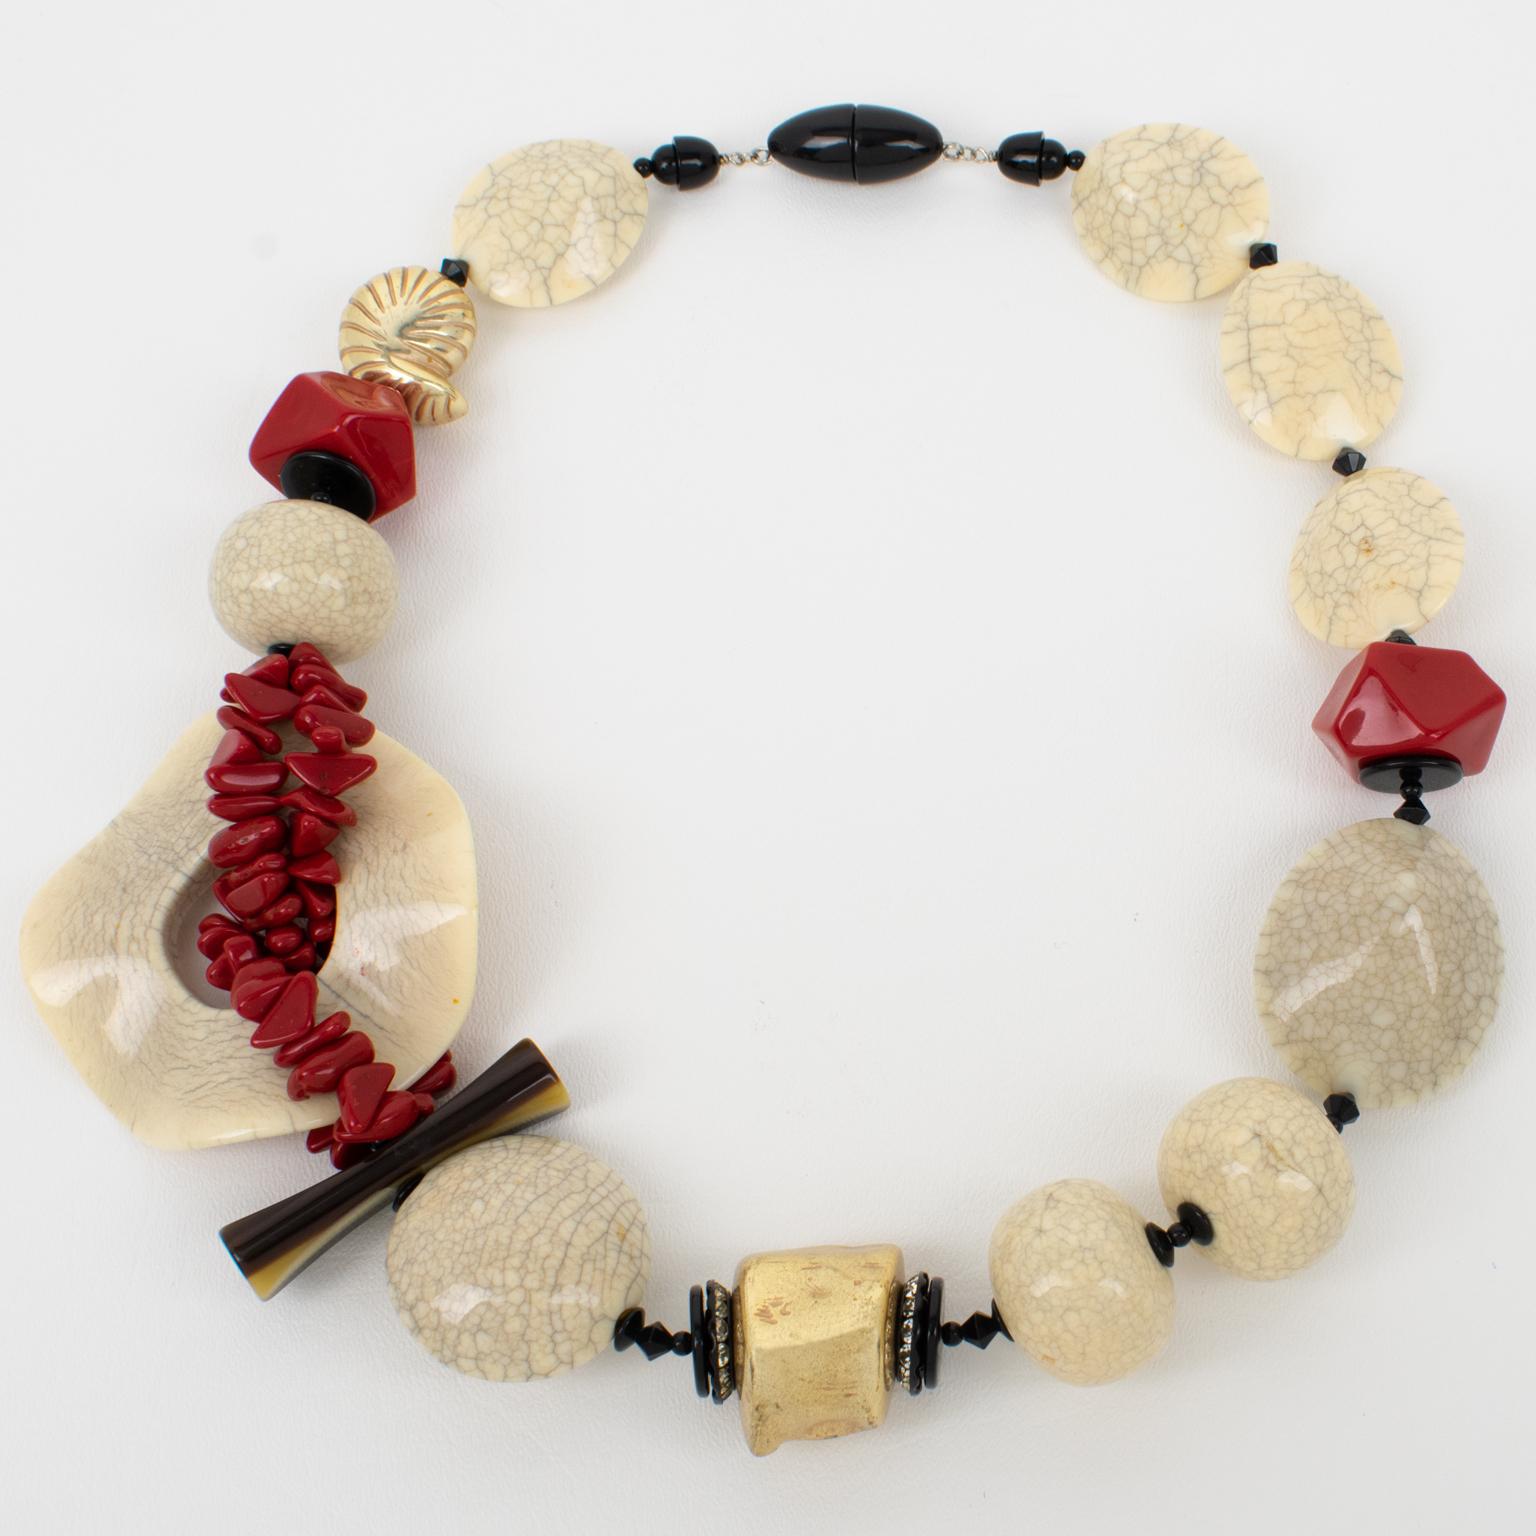 This impressive Angela Caputi, made-in-Italy resin necklace features a sculptural Japanese-inspired oversized design. The piece is built with faux-ceramic beads in an off-white marble color complimented with faux red Cinnabar elements and ornates